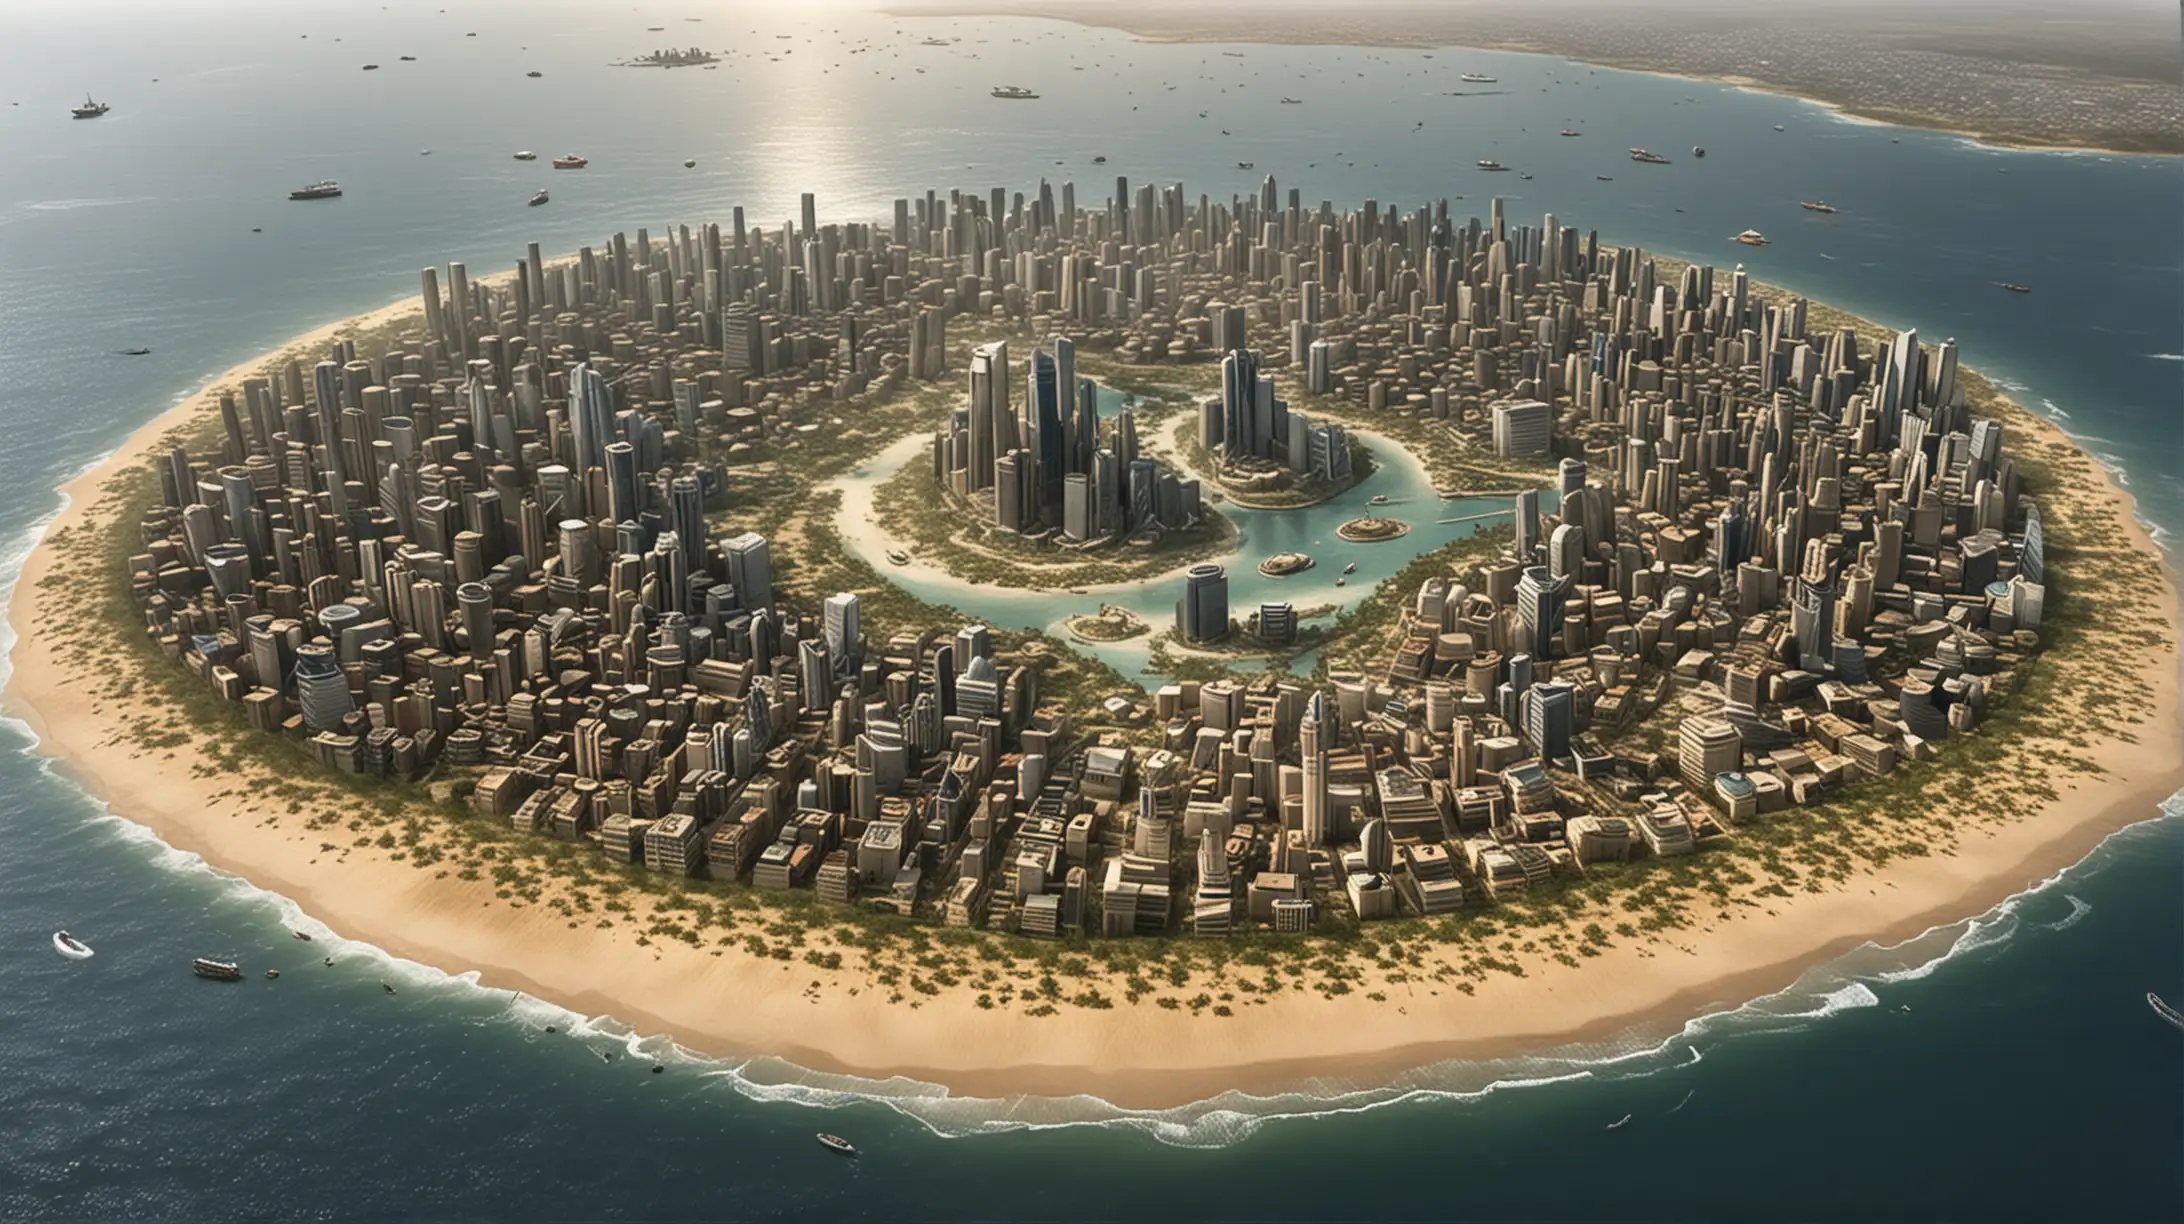 ARTIFICAL ISLAND EXPANSION WITH MEGA CITY IN AFRICA